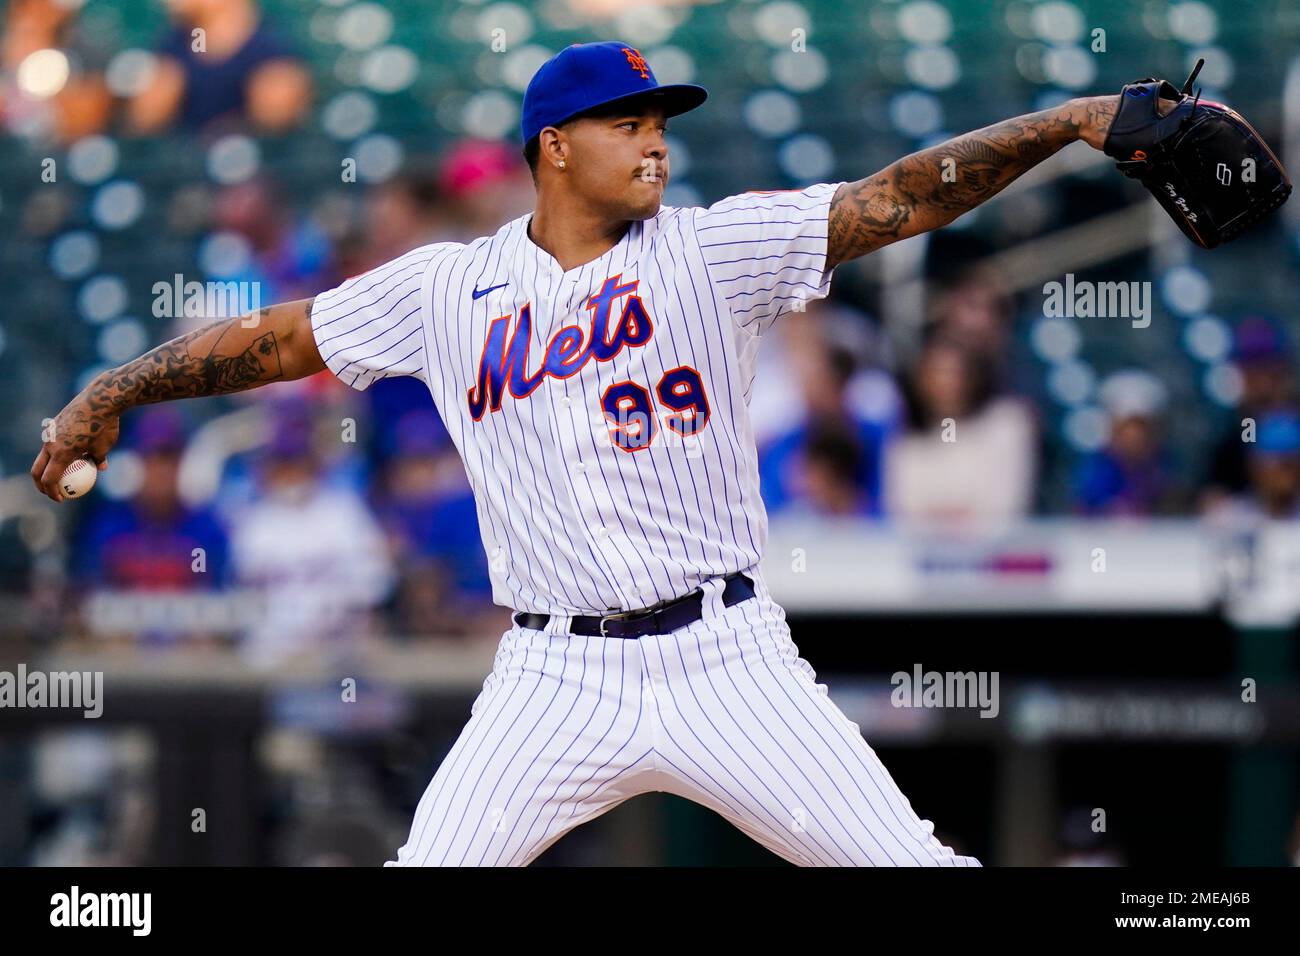 New York Mets' Taijuan Walker delivers a pitch during the first